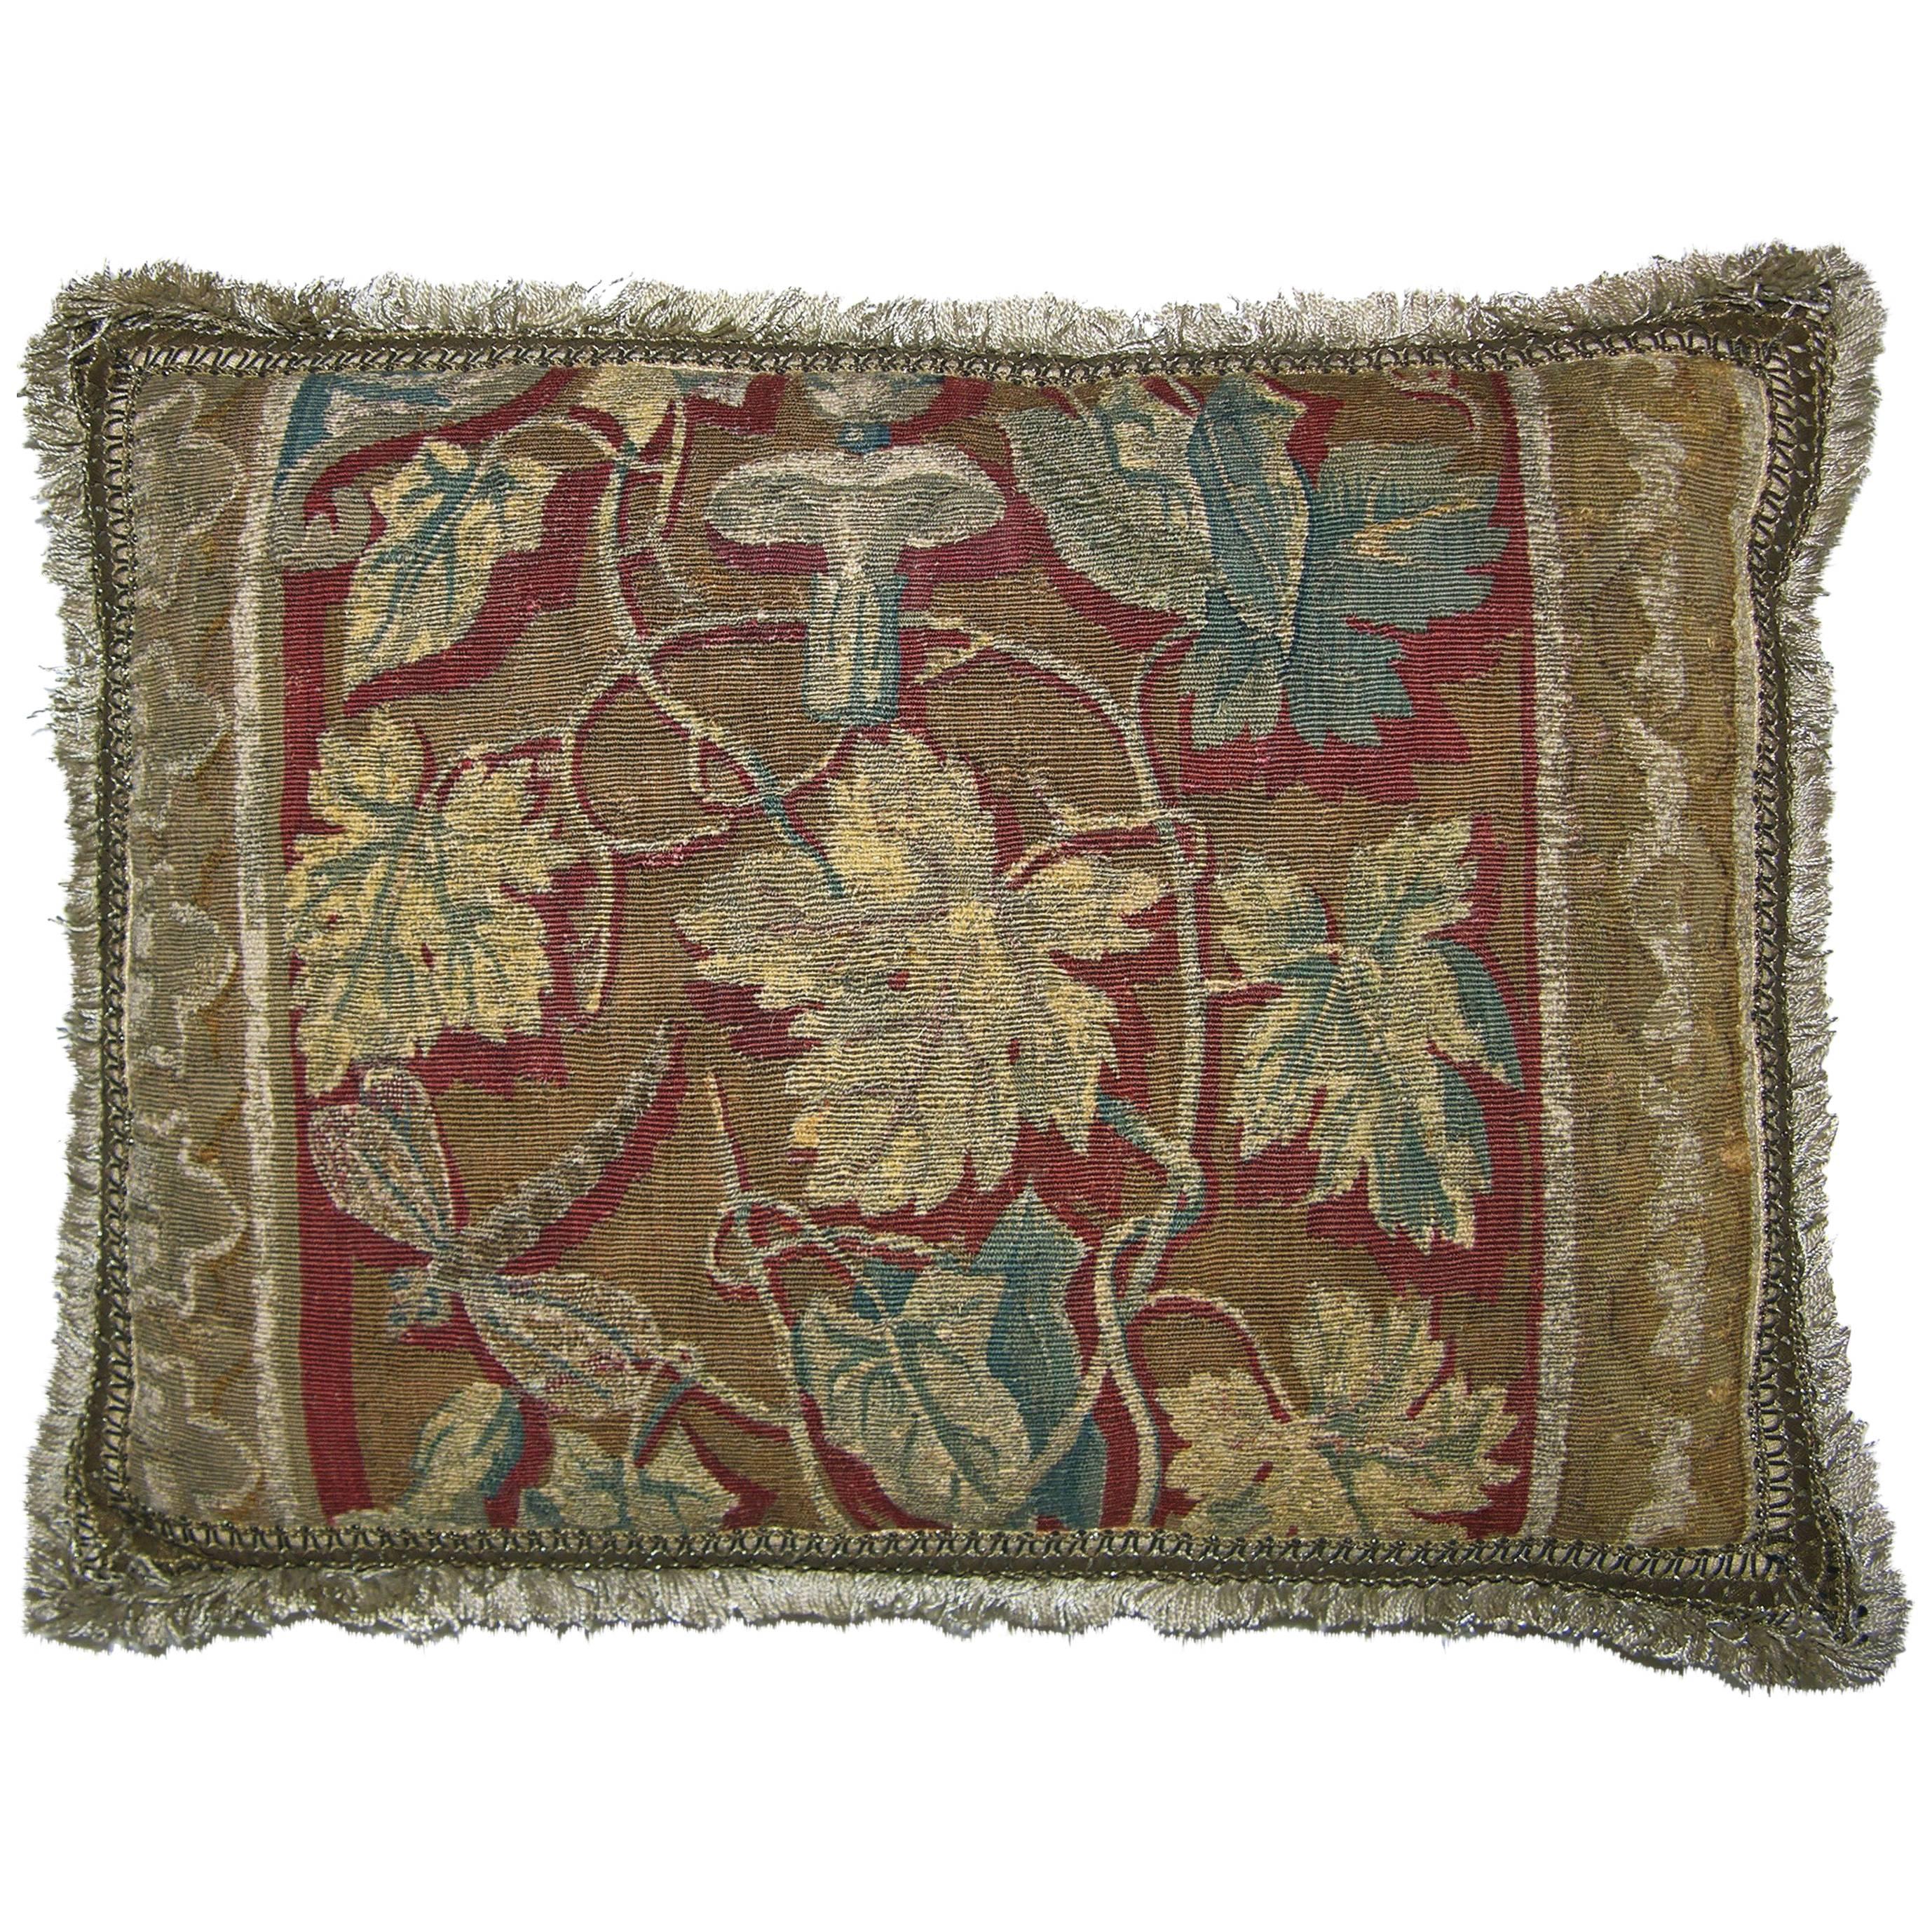 Antique Brussels Tapestry Pillow, circa 1660-1680